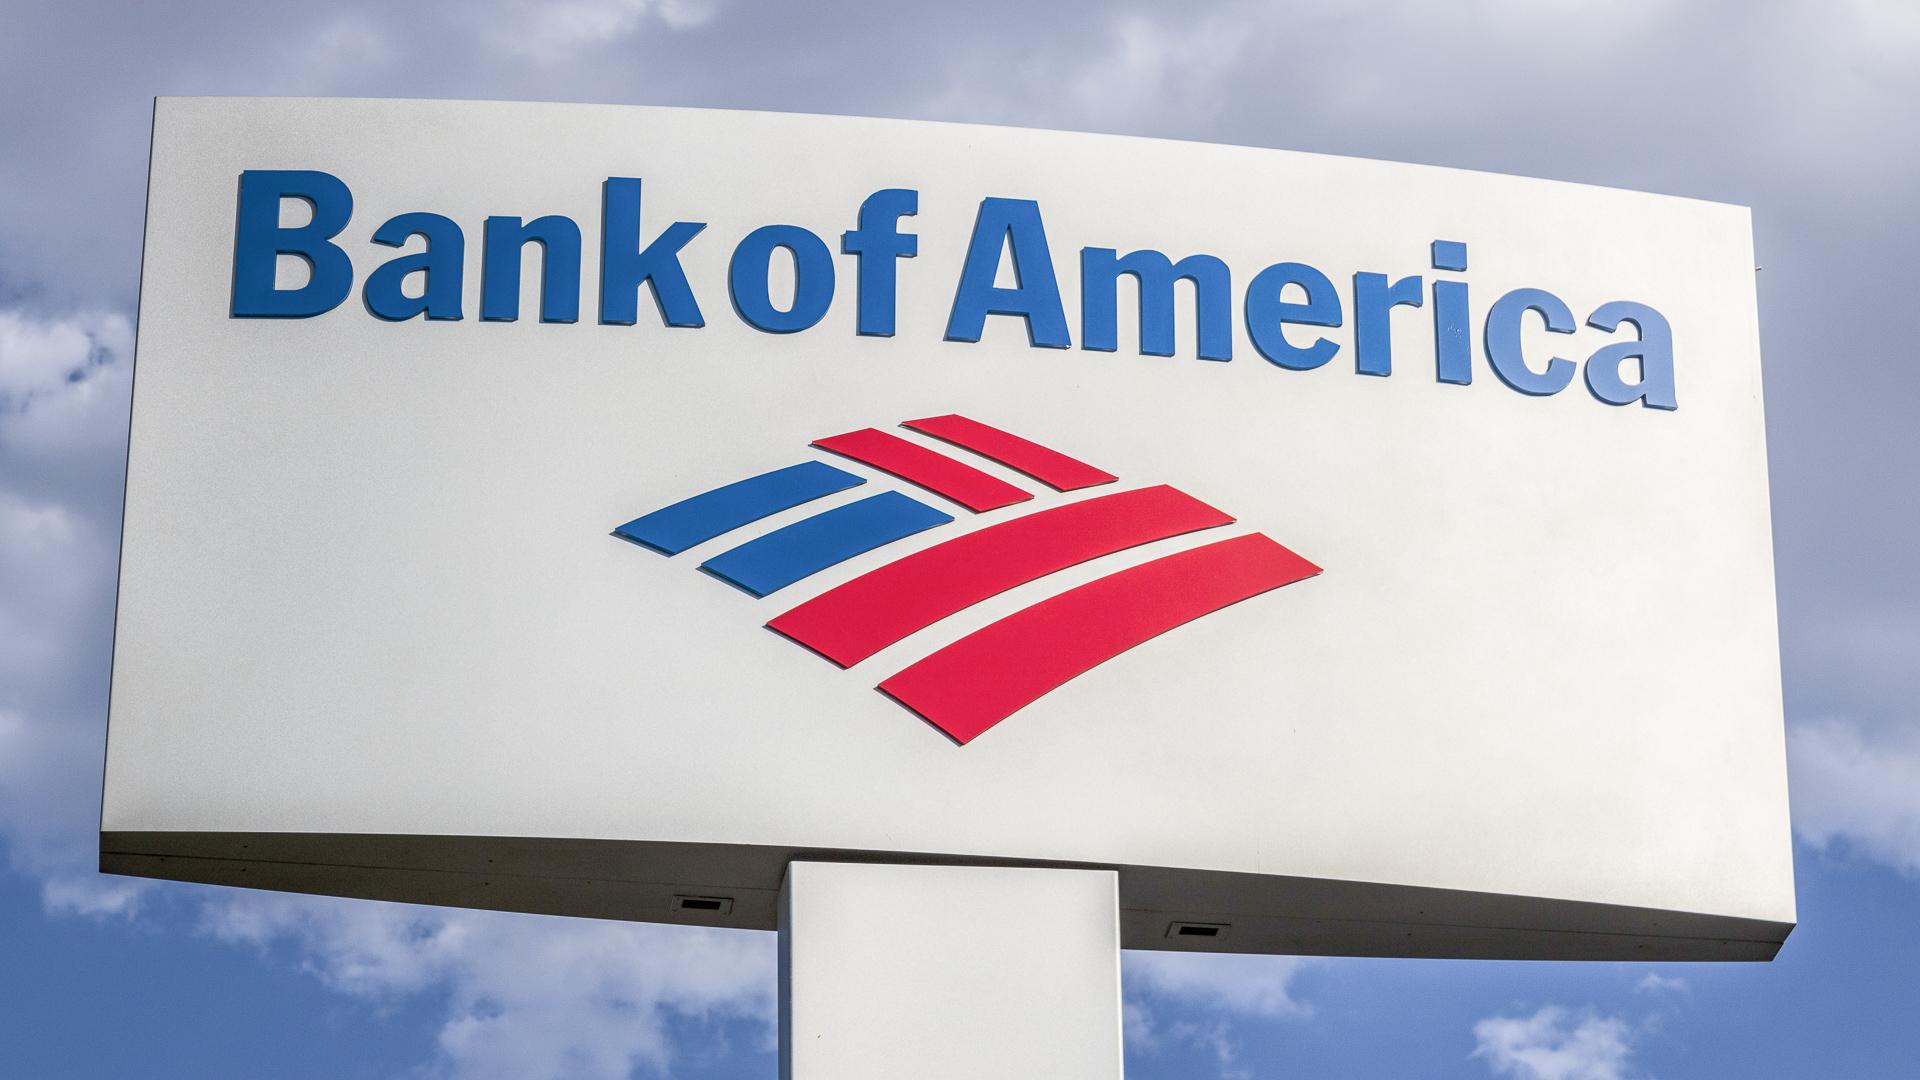 How to Set Up Bank of America Direct Deposit